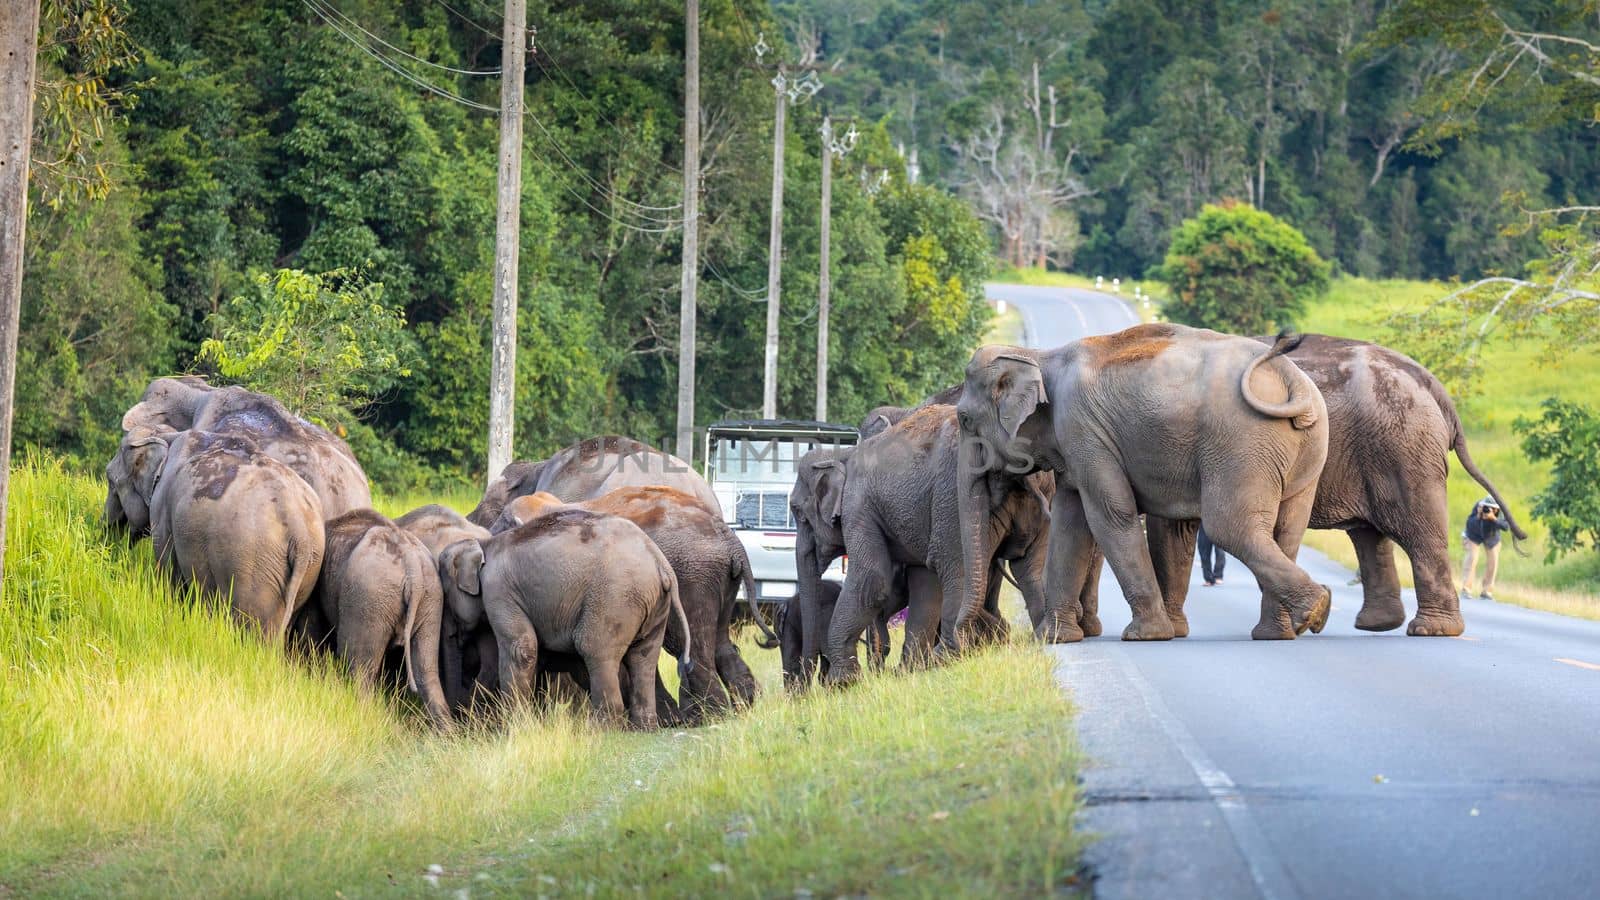 Wild elephants walking from green grass field and crossing rural road inside tropical rainforest with tourists observed in Khao yai national park, Thailand.